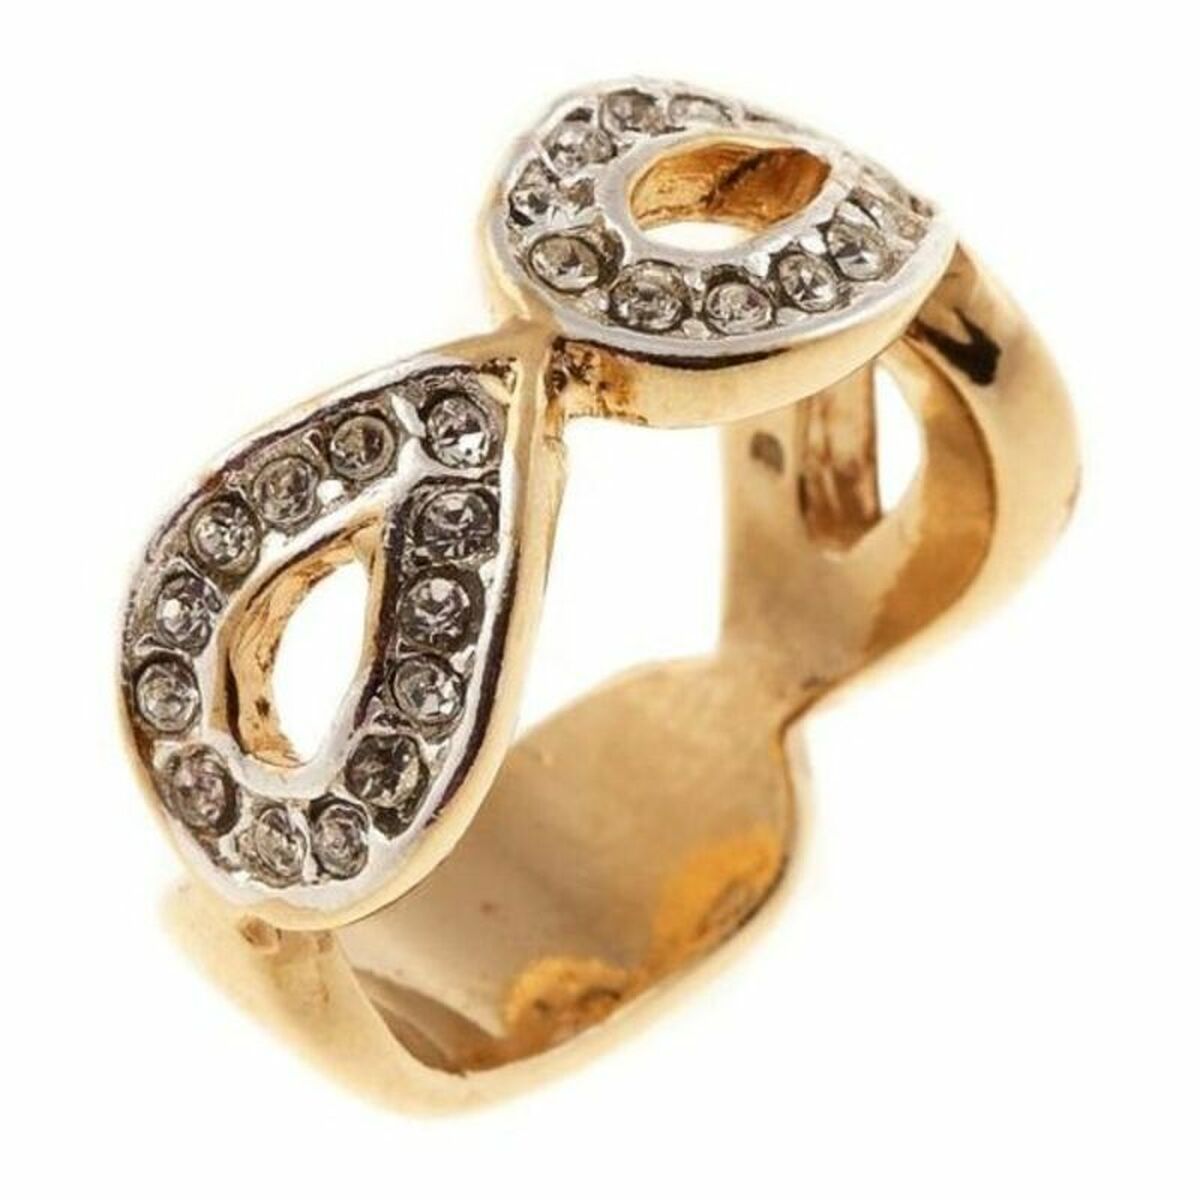 Bague Femme Cristian Lay 43328200 (Taille 20)